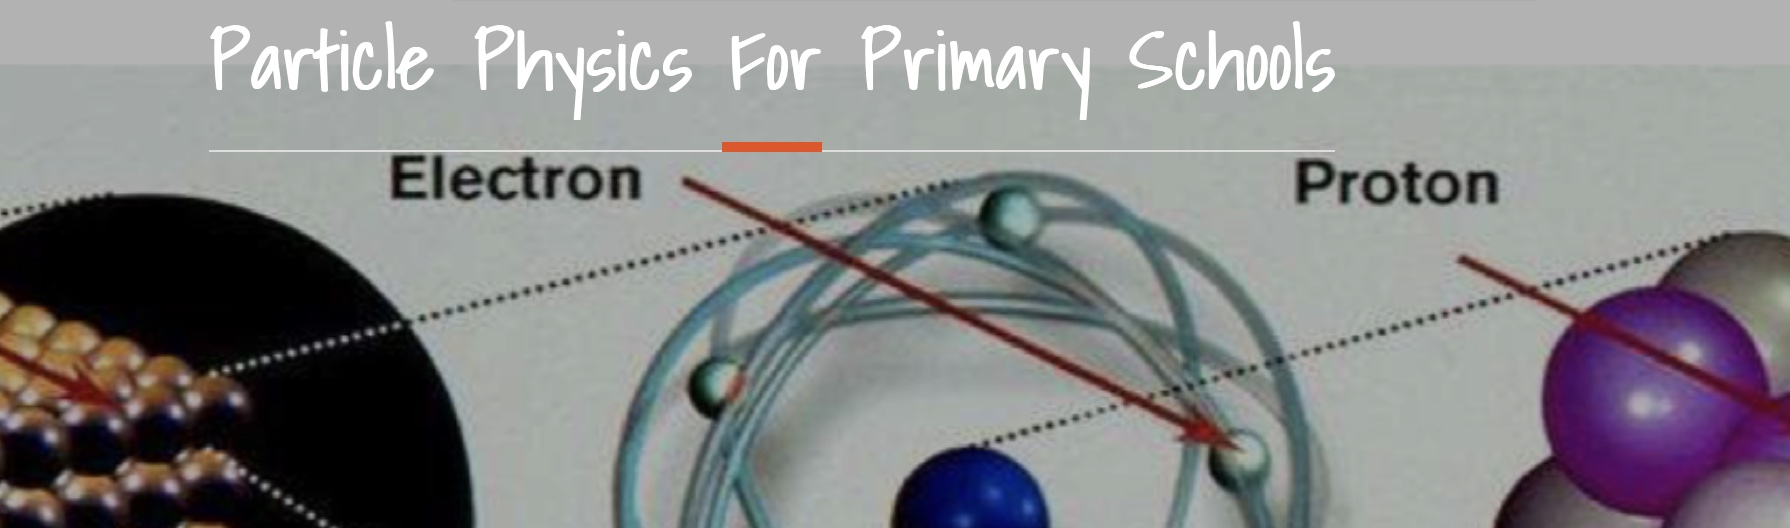 Particle Physics for Primary Schools